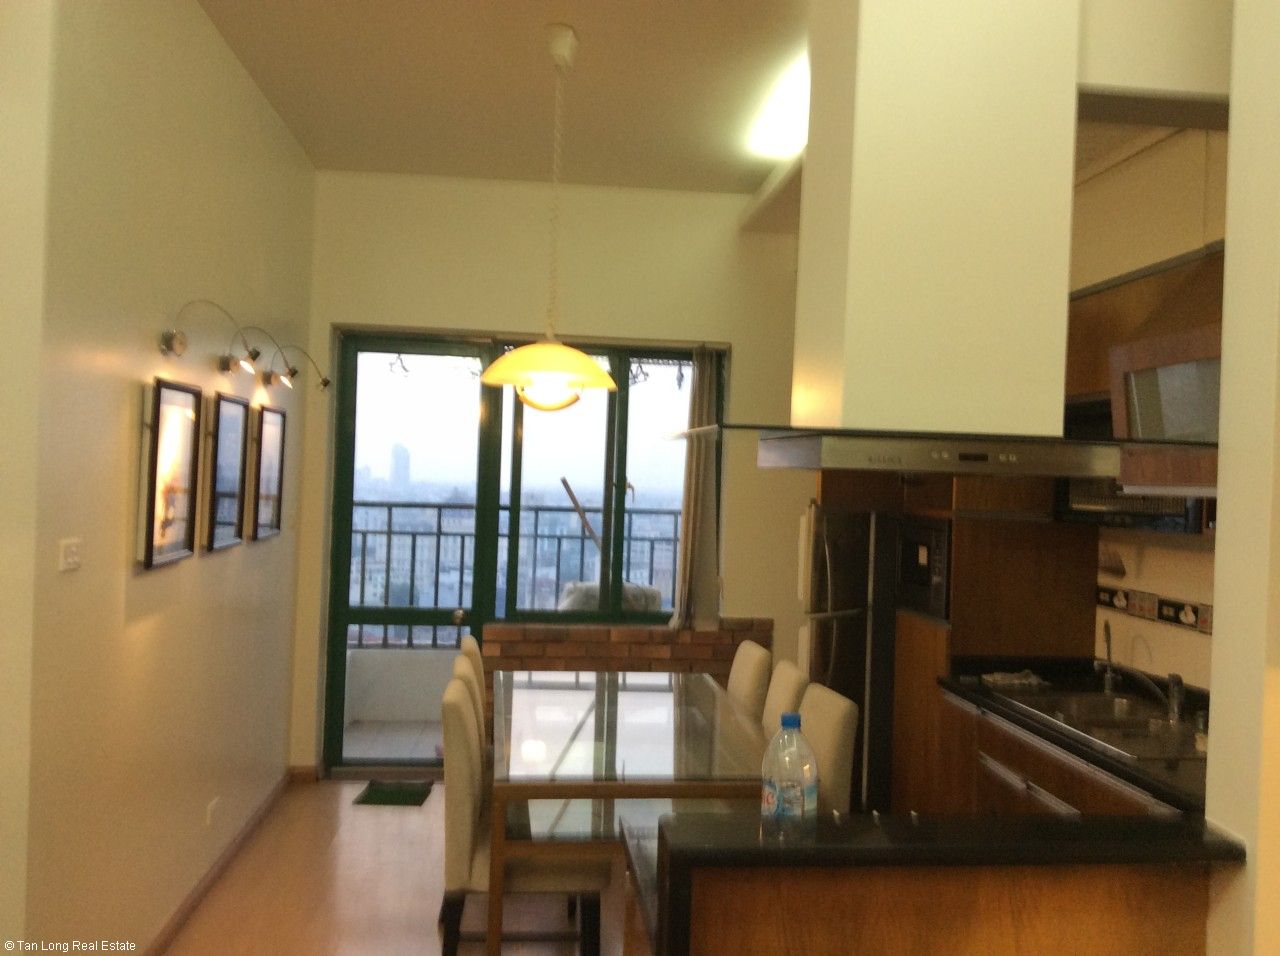 Fully equipped 3 bedroom apartment for rent in Kinh Do Building, Hai Ba Trung dist, Hanoi 3